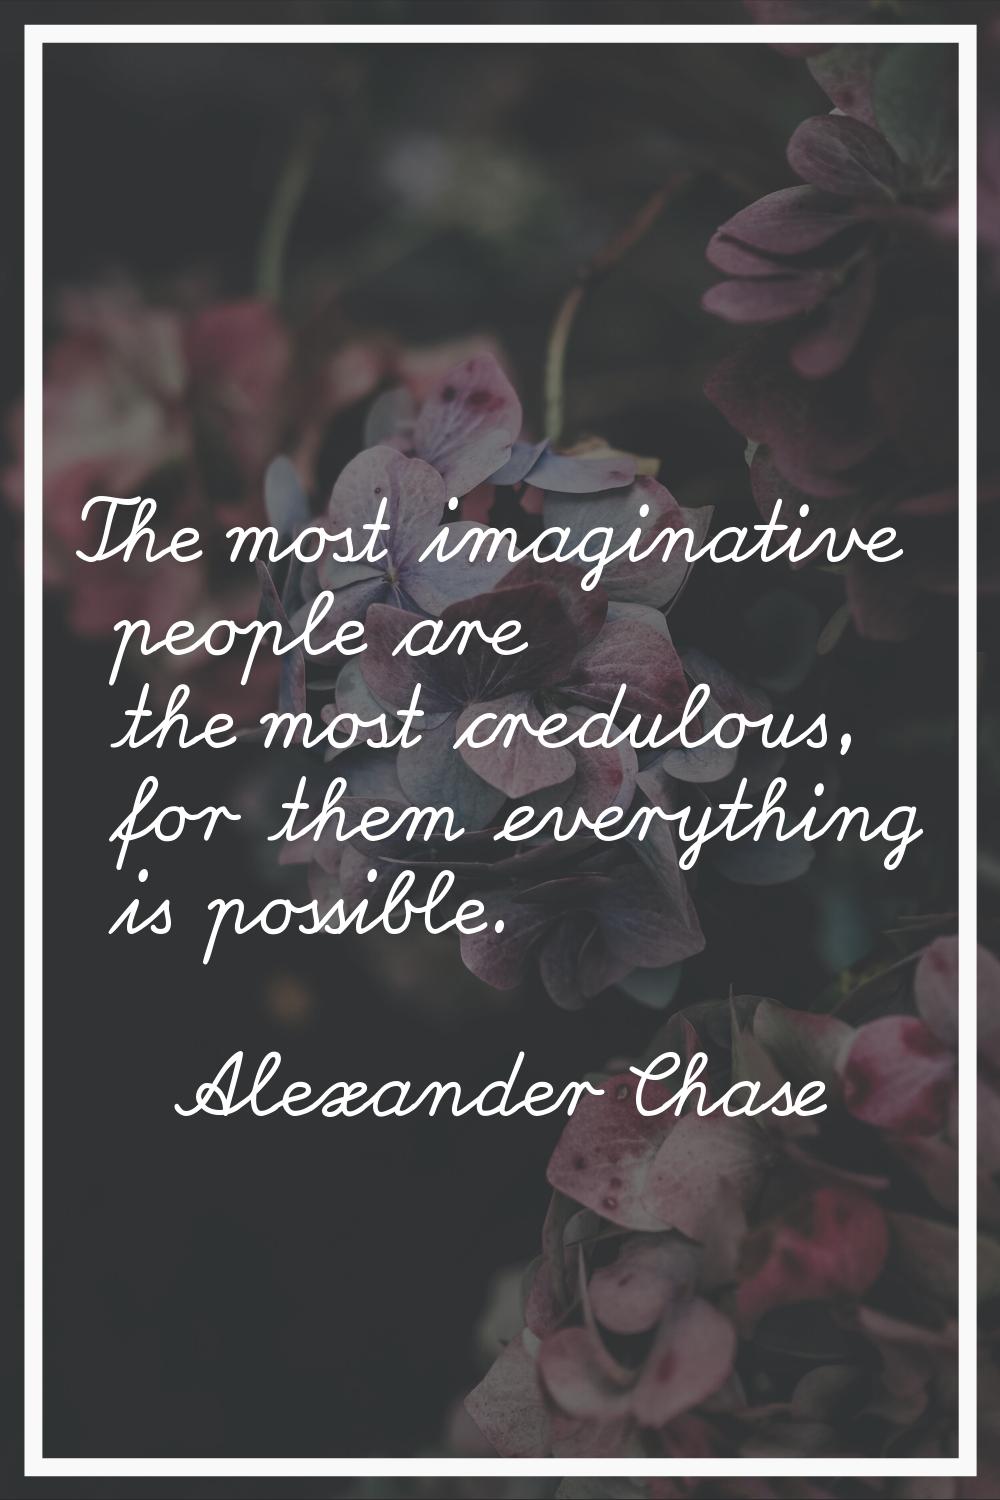 The most imaginative people are the most credulous, for them everything is possible.